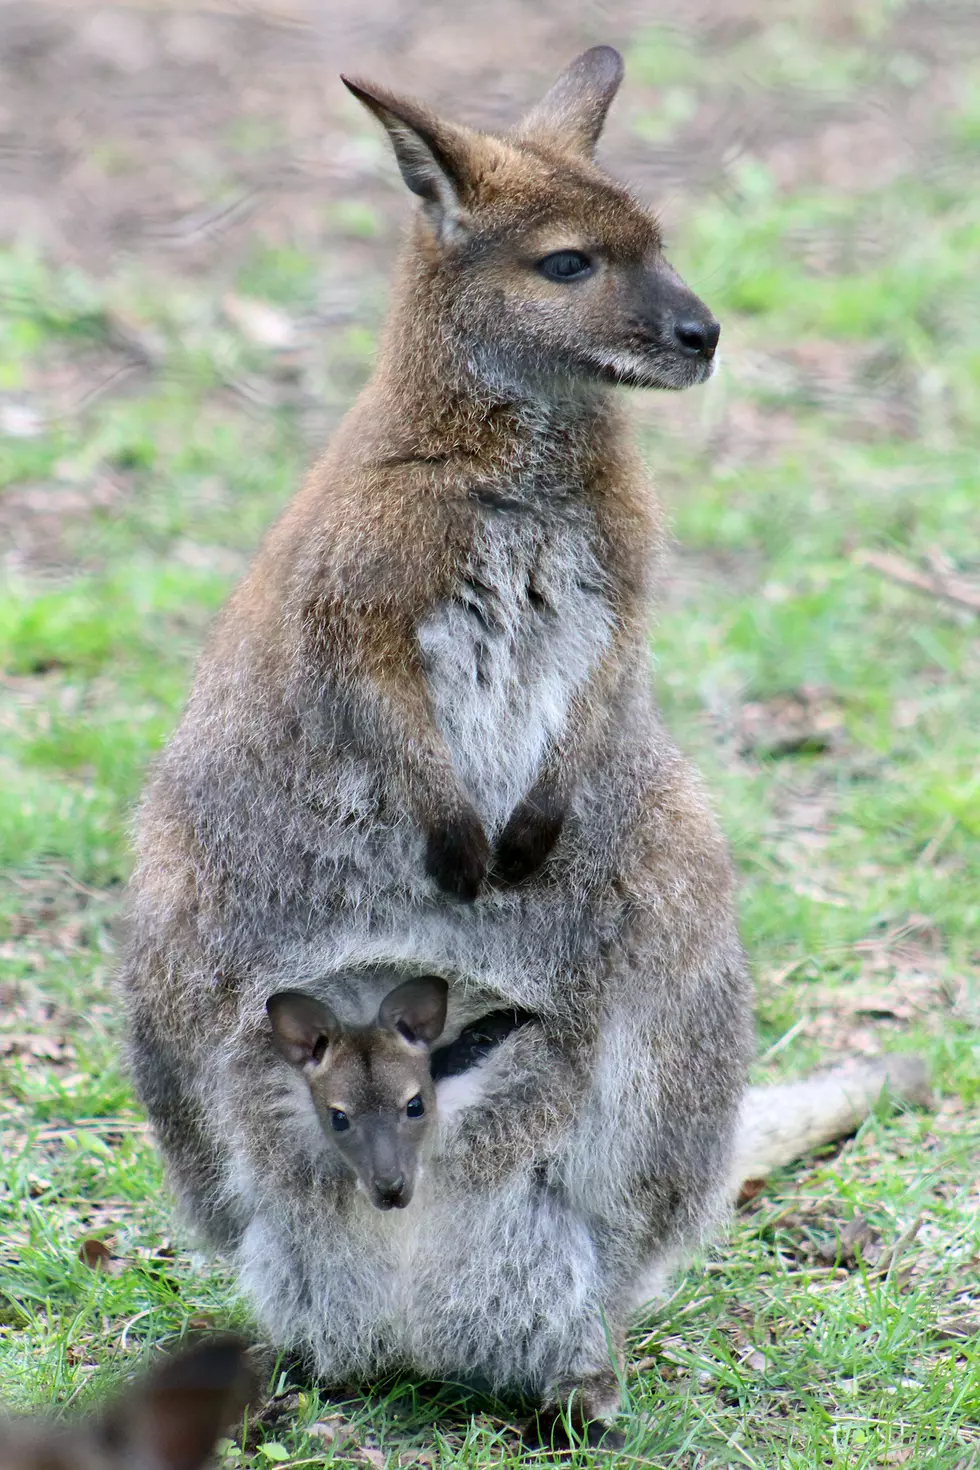 How About Mother&#8217;s Day at Binder Park Zoo